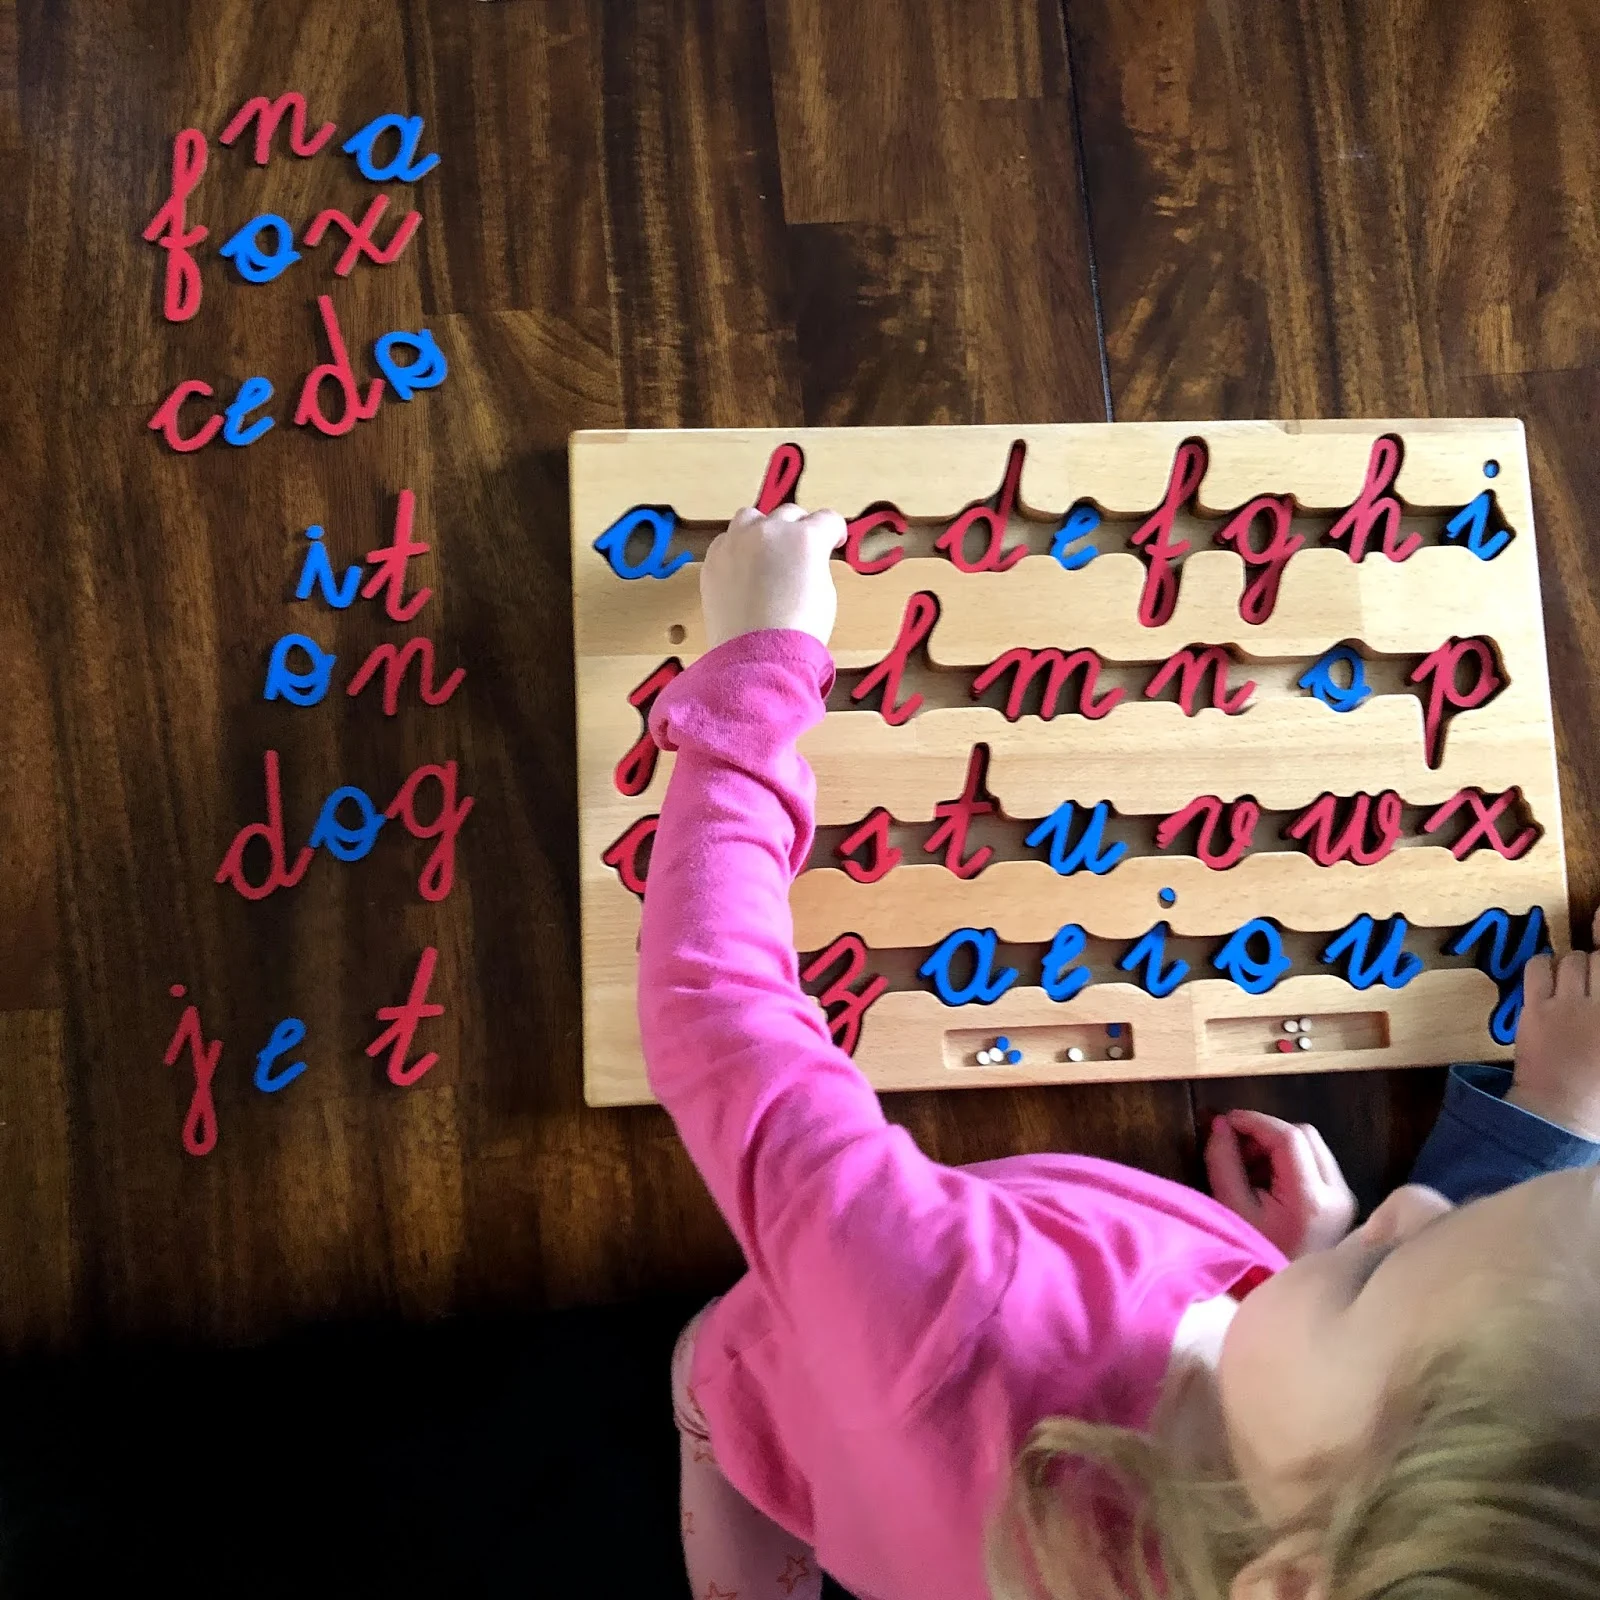 The Montessori movable alphabet can give young children the tools they need to write well before they are able to write with paper. Here are some common questions and some movable alphabet options.